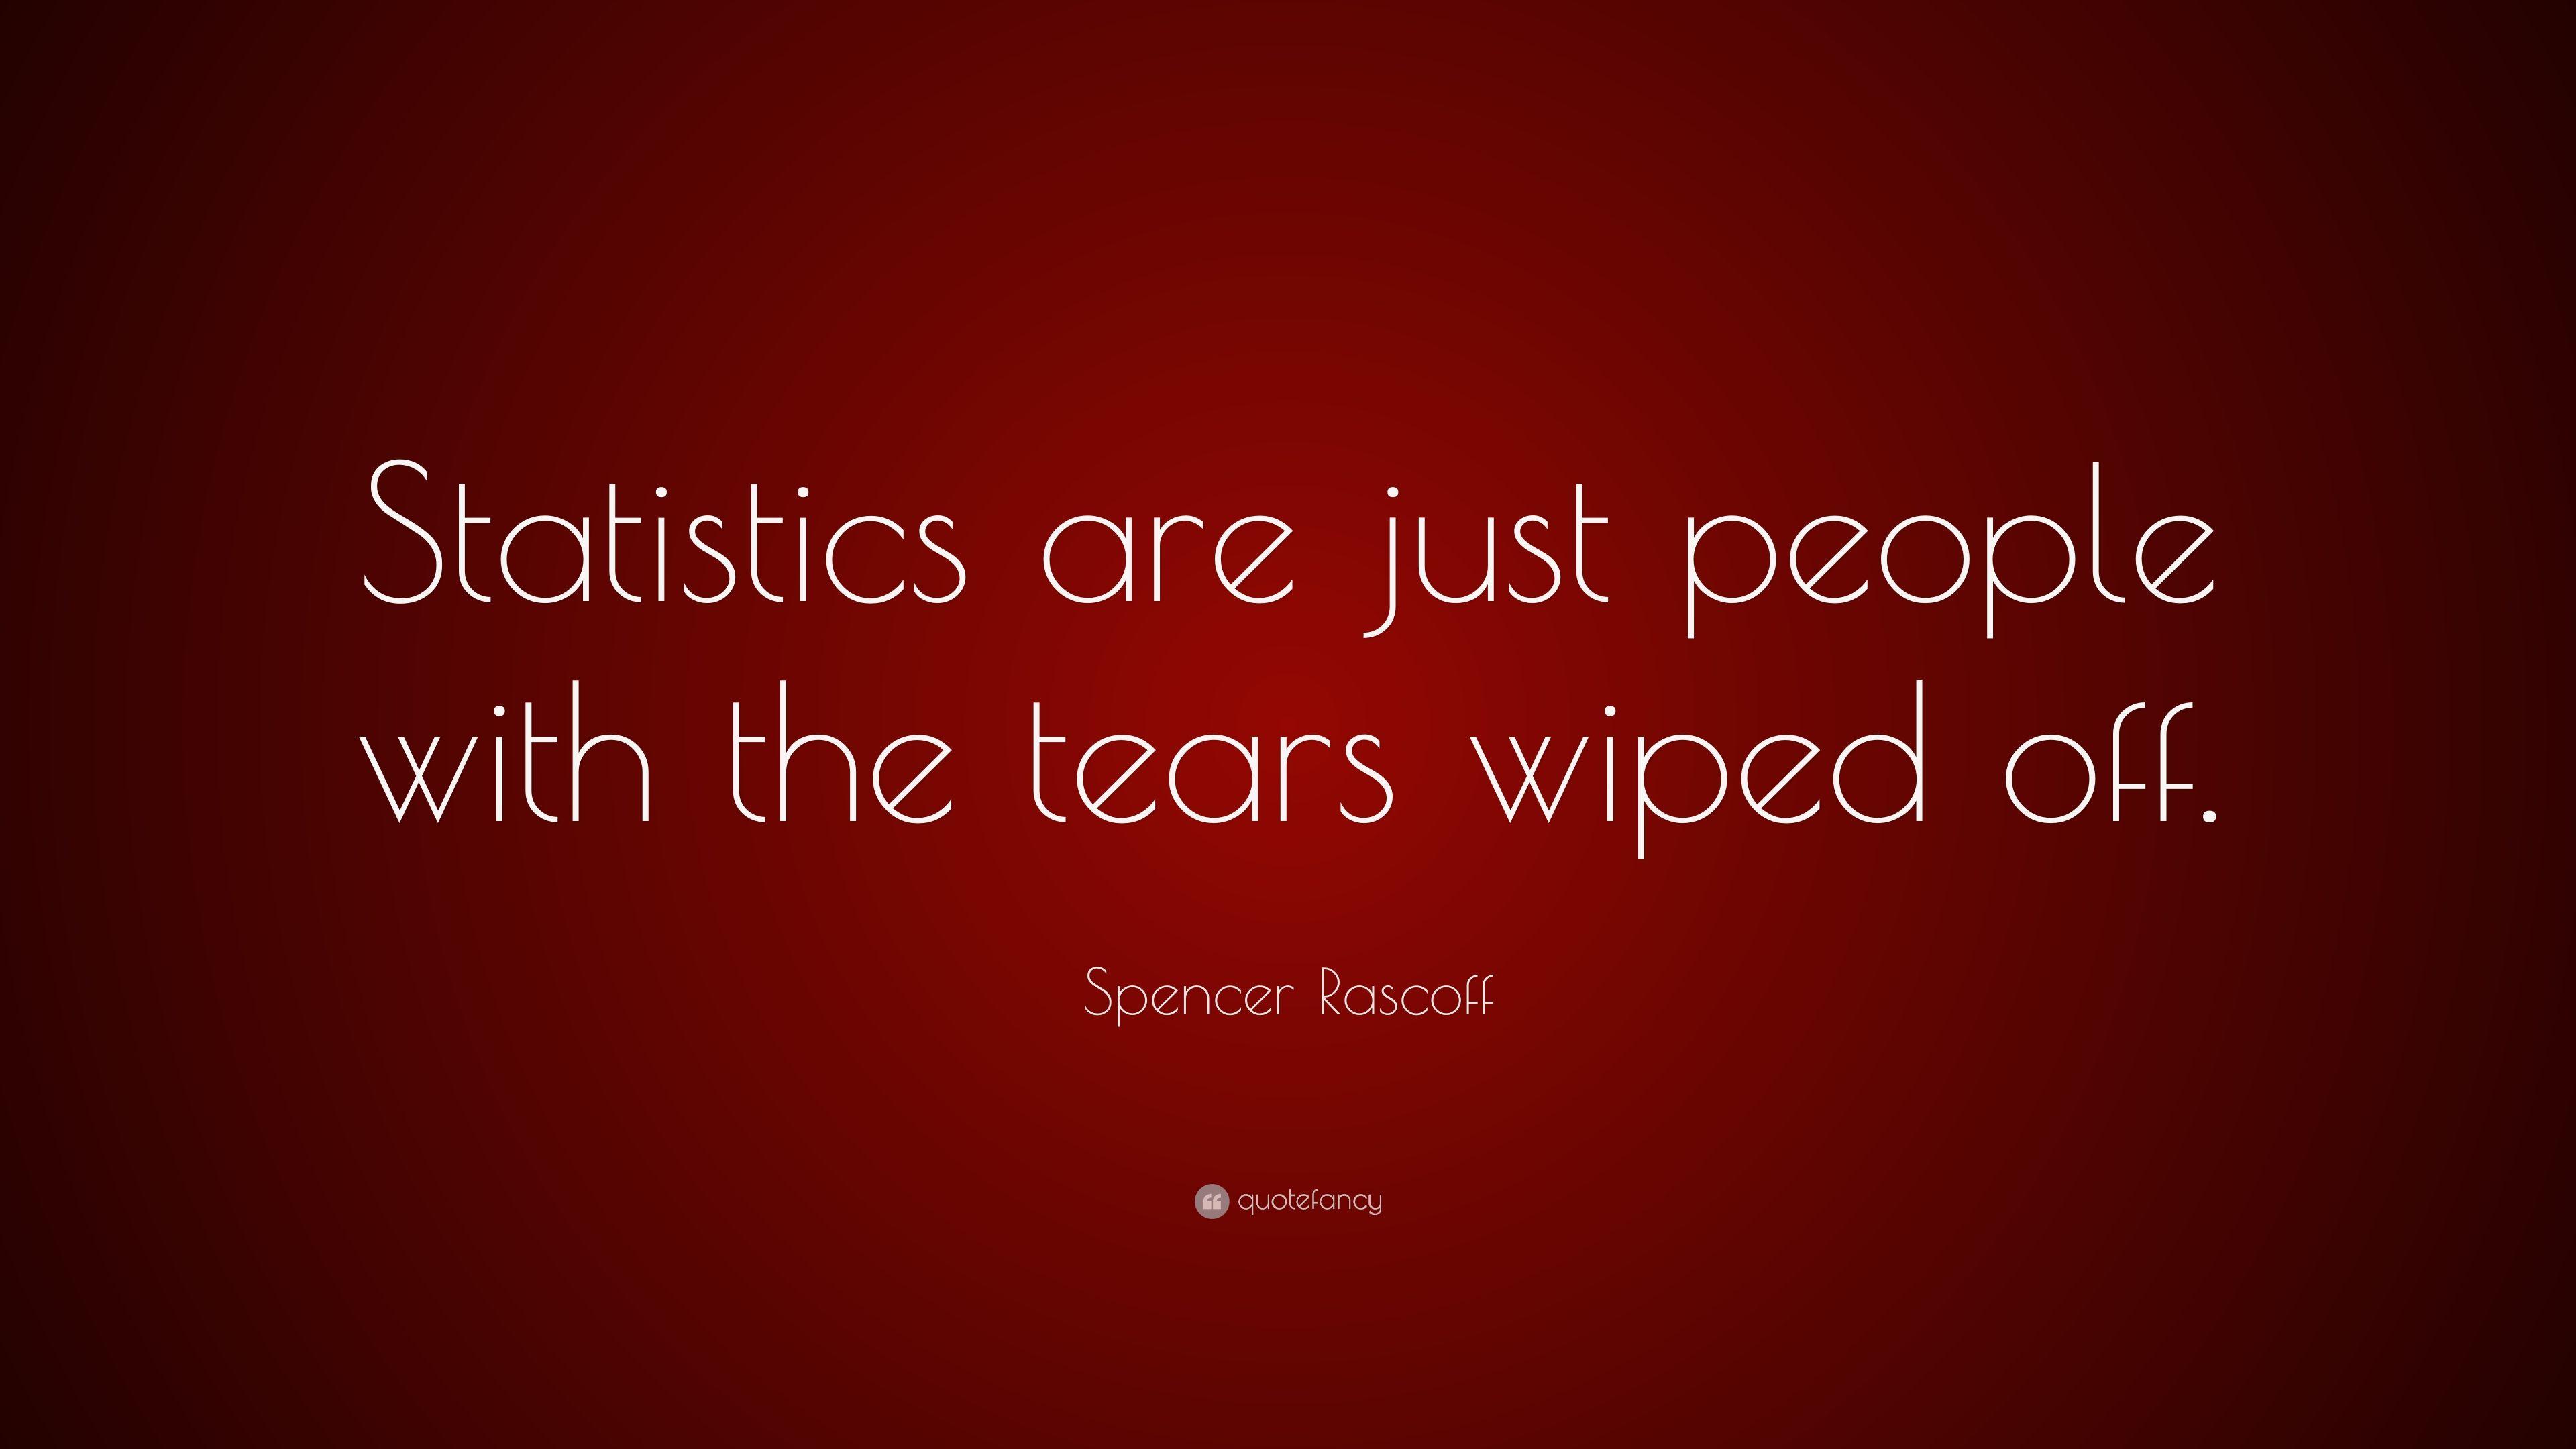 Spencer Rascoff Quote: “Statistics are just people with the tears